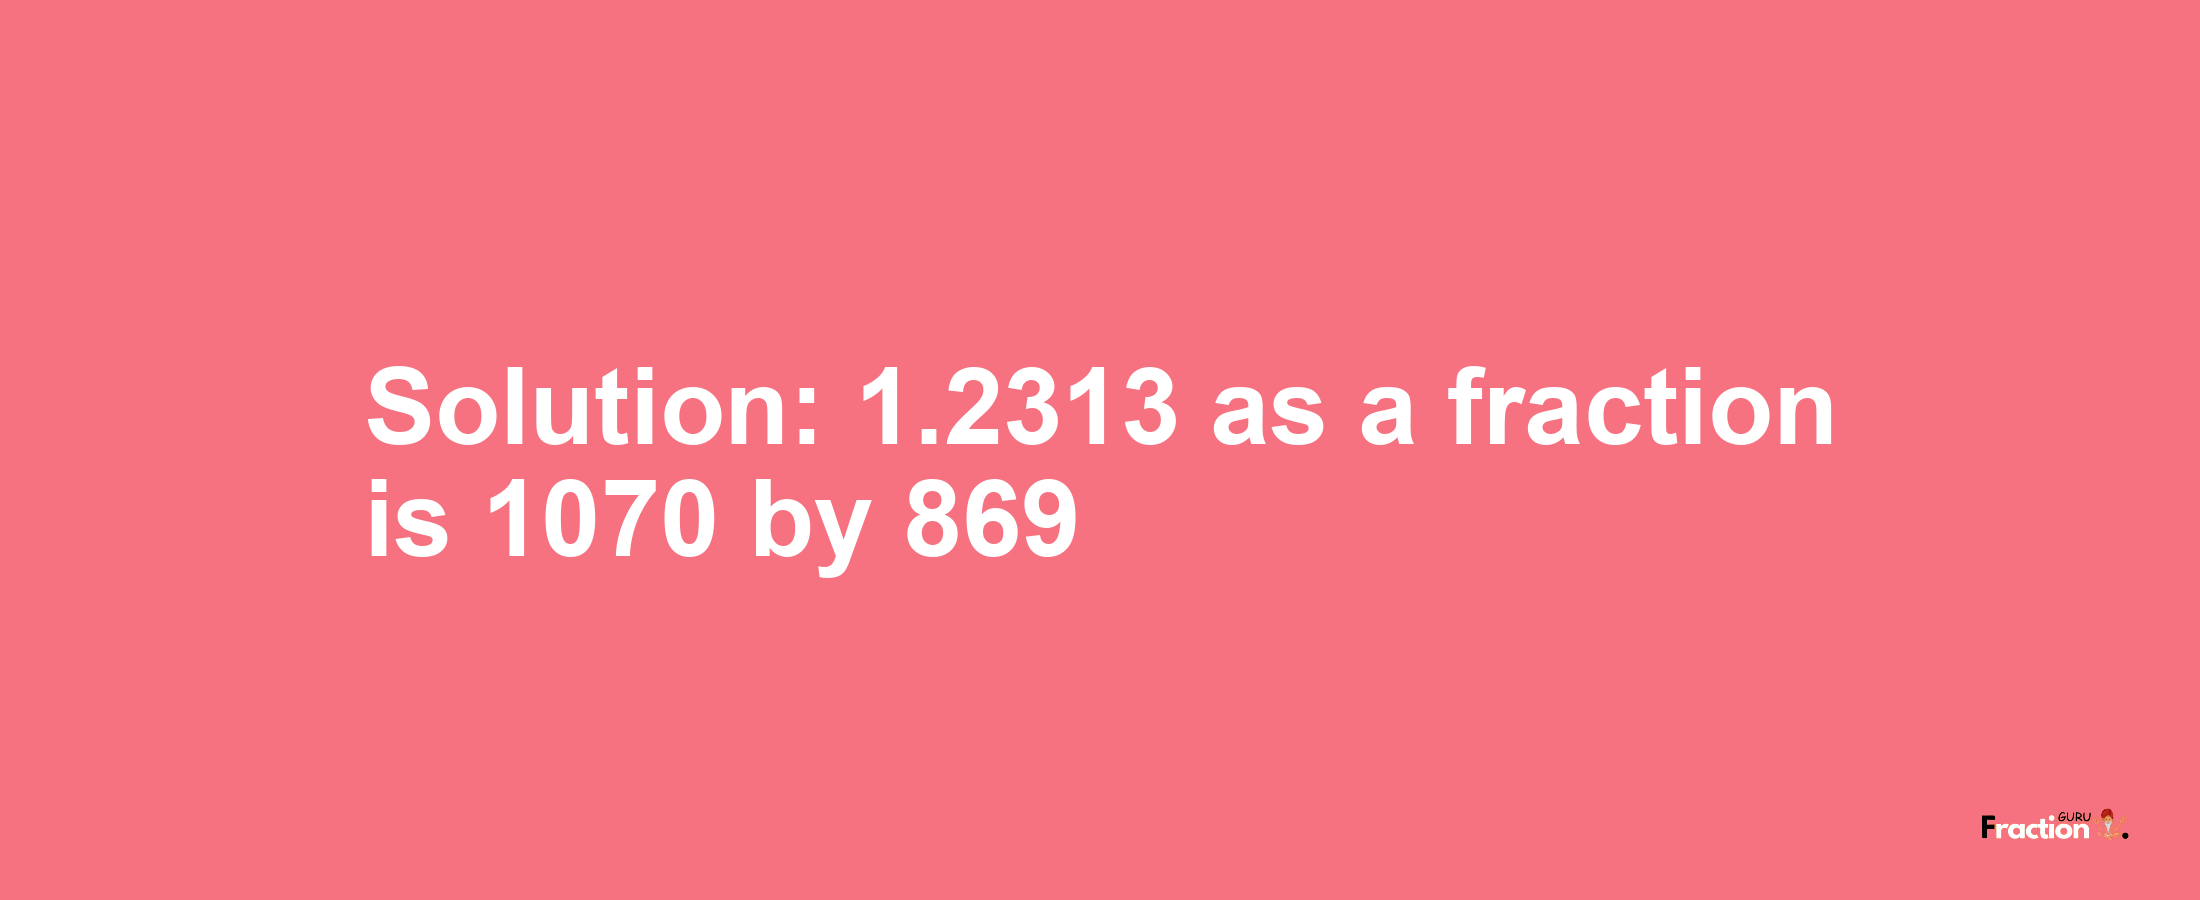 Solution:1.2313 as a fraction is 1070/869